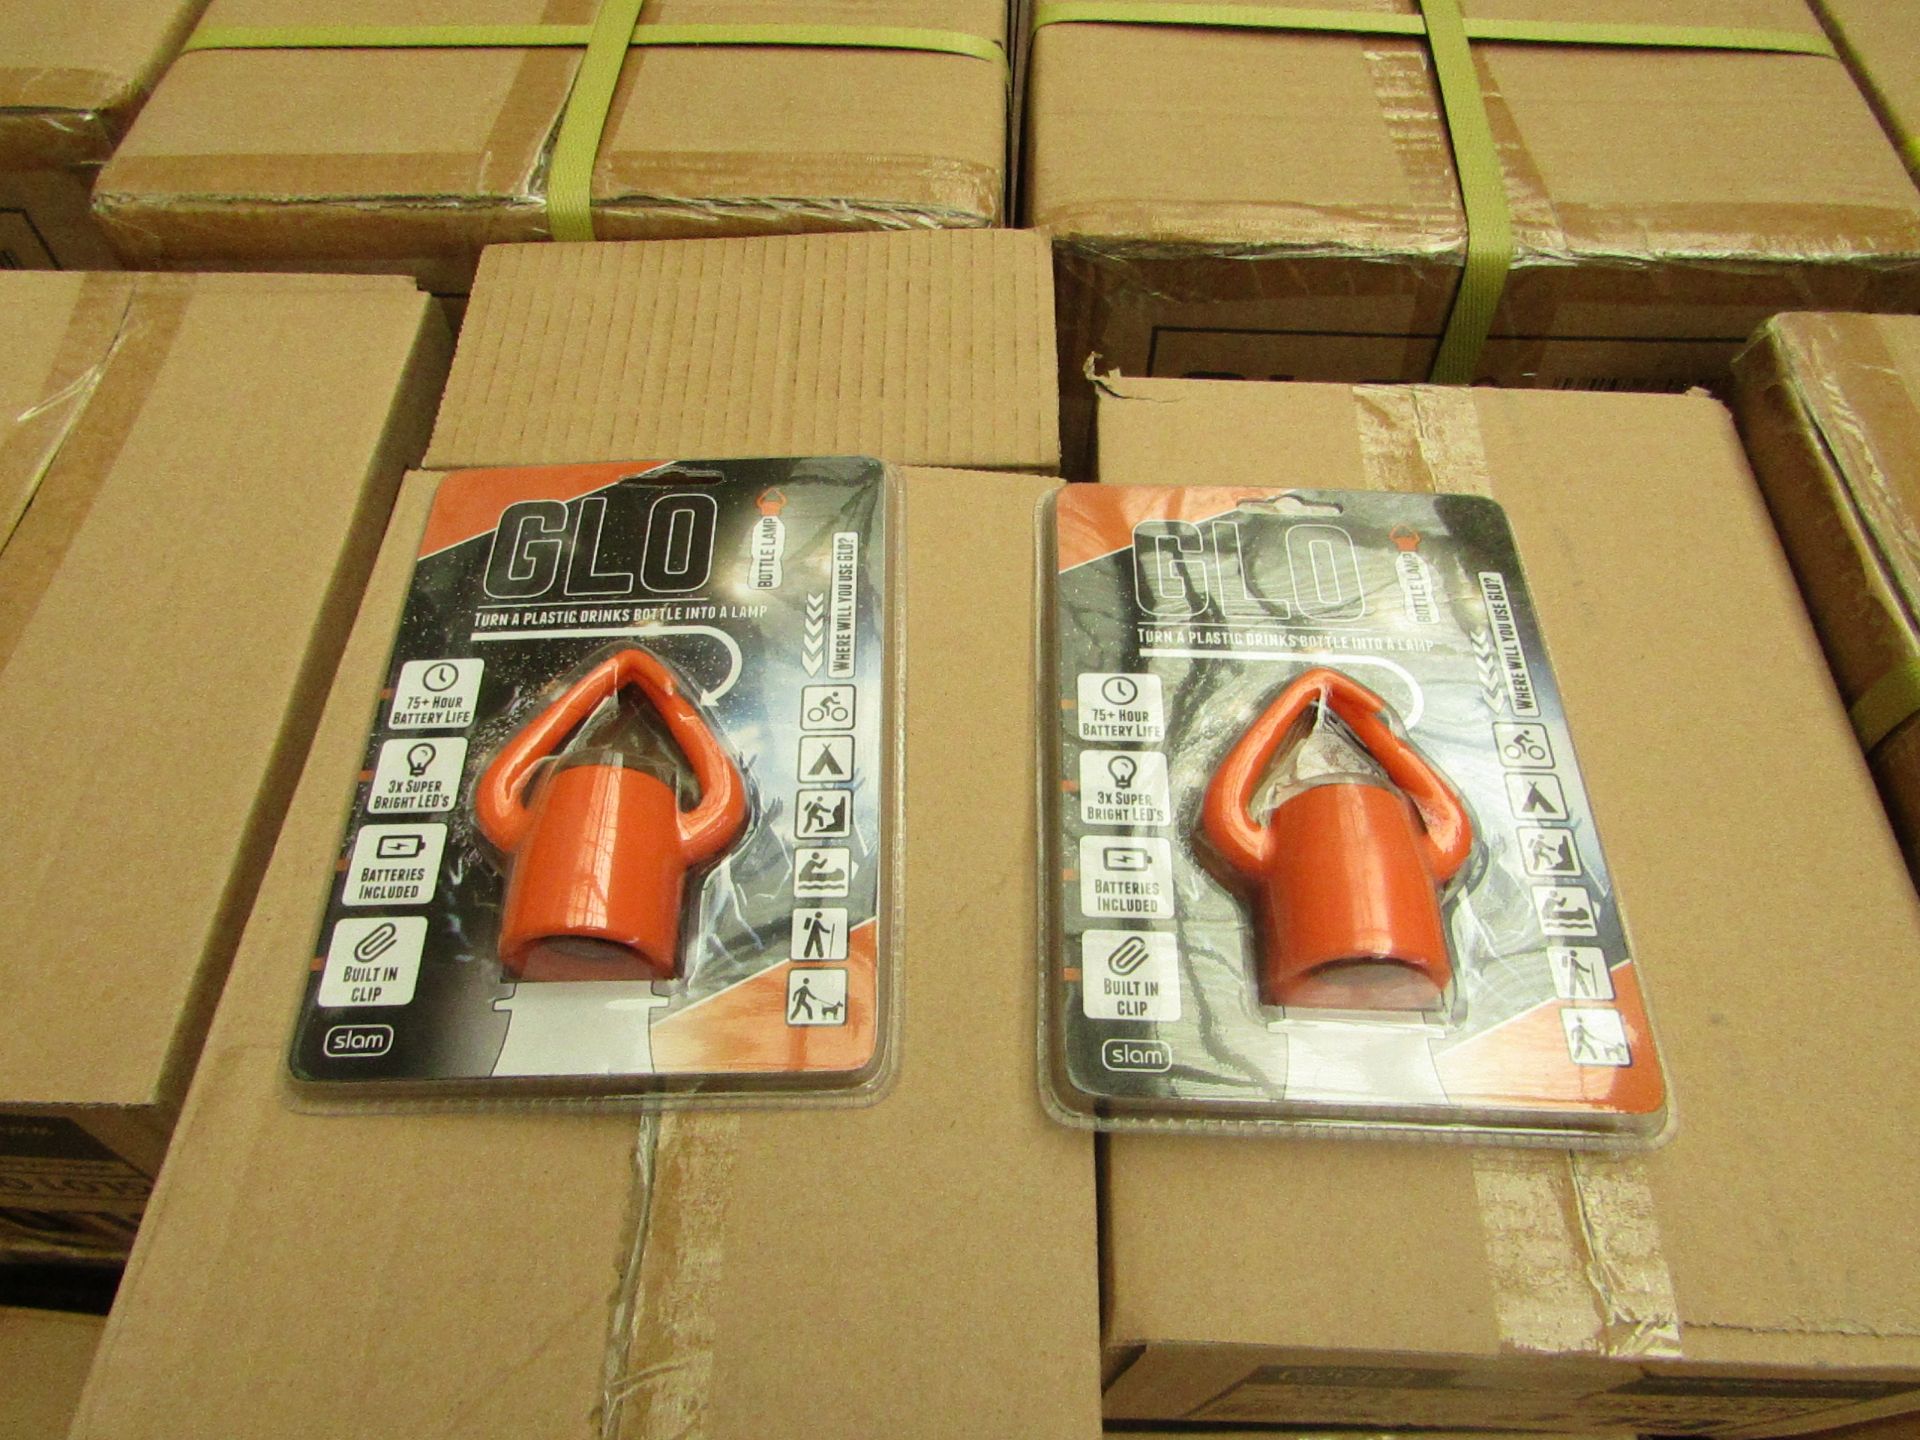 2 boxes of 12 GLO - Bottle Lamps - Packaged & Boxed.